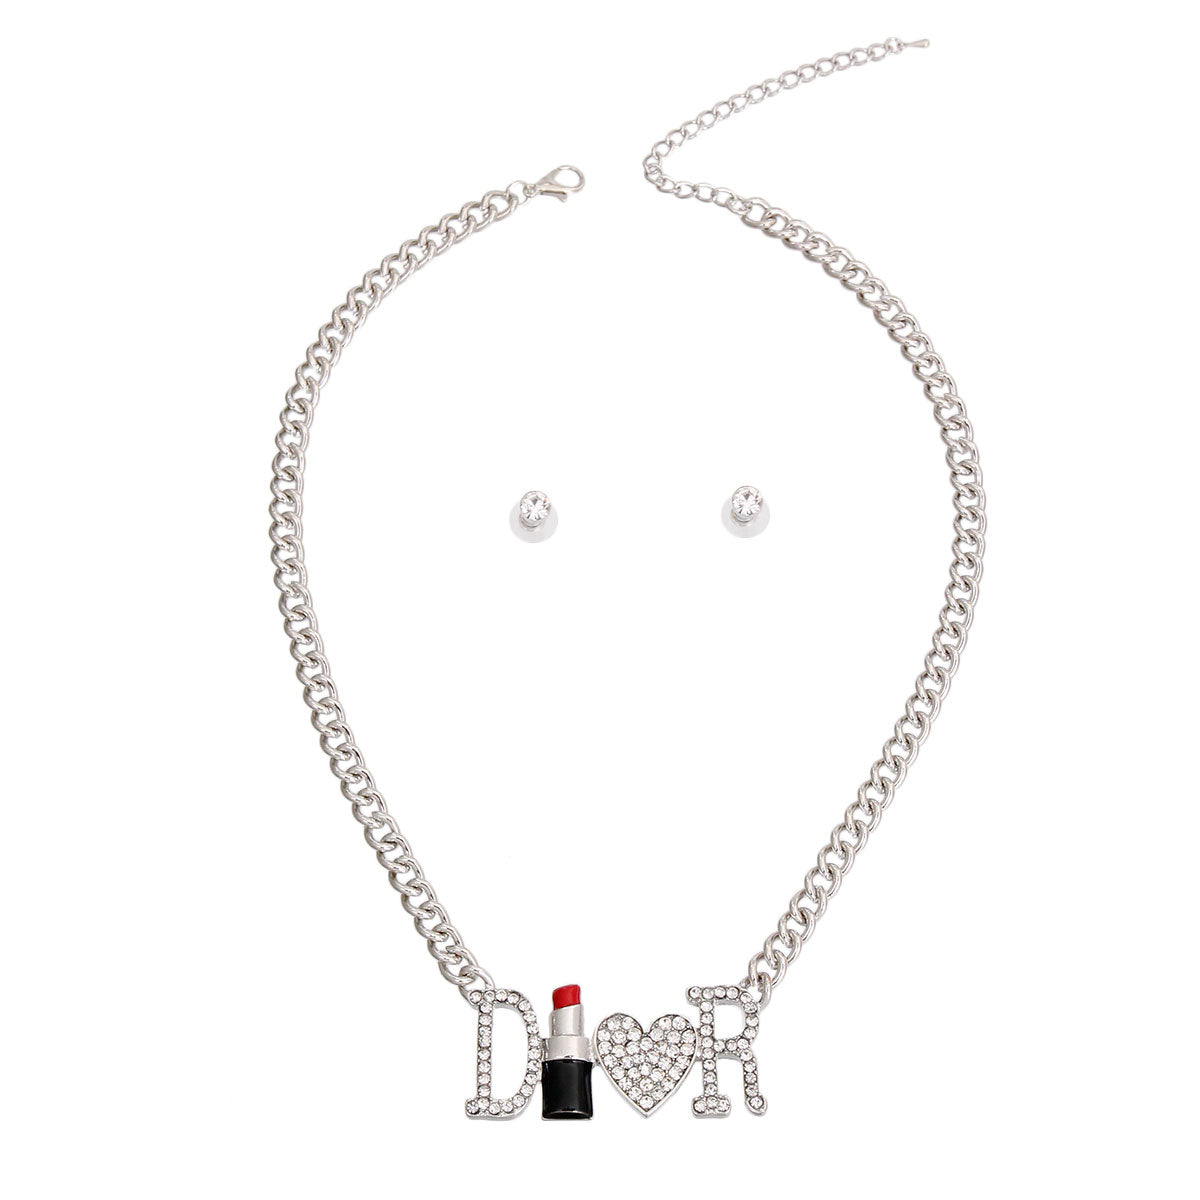 Dior Inspired Silver Lipstick Necklace